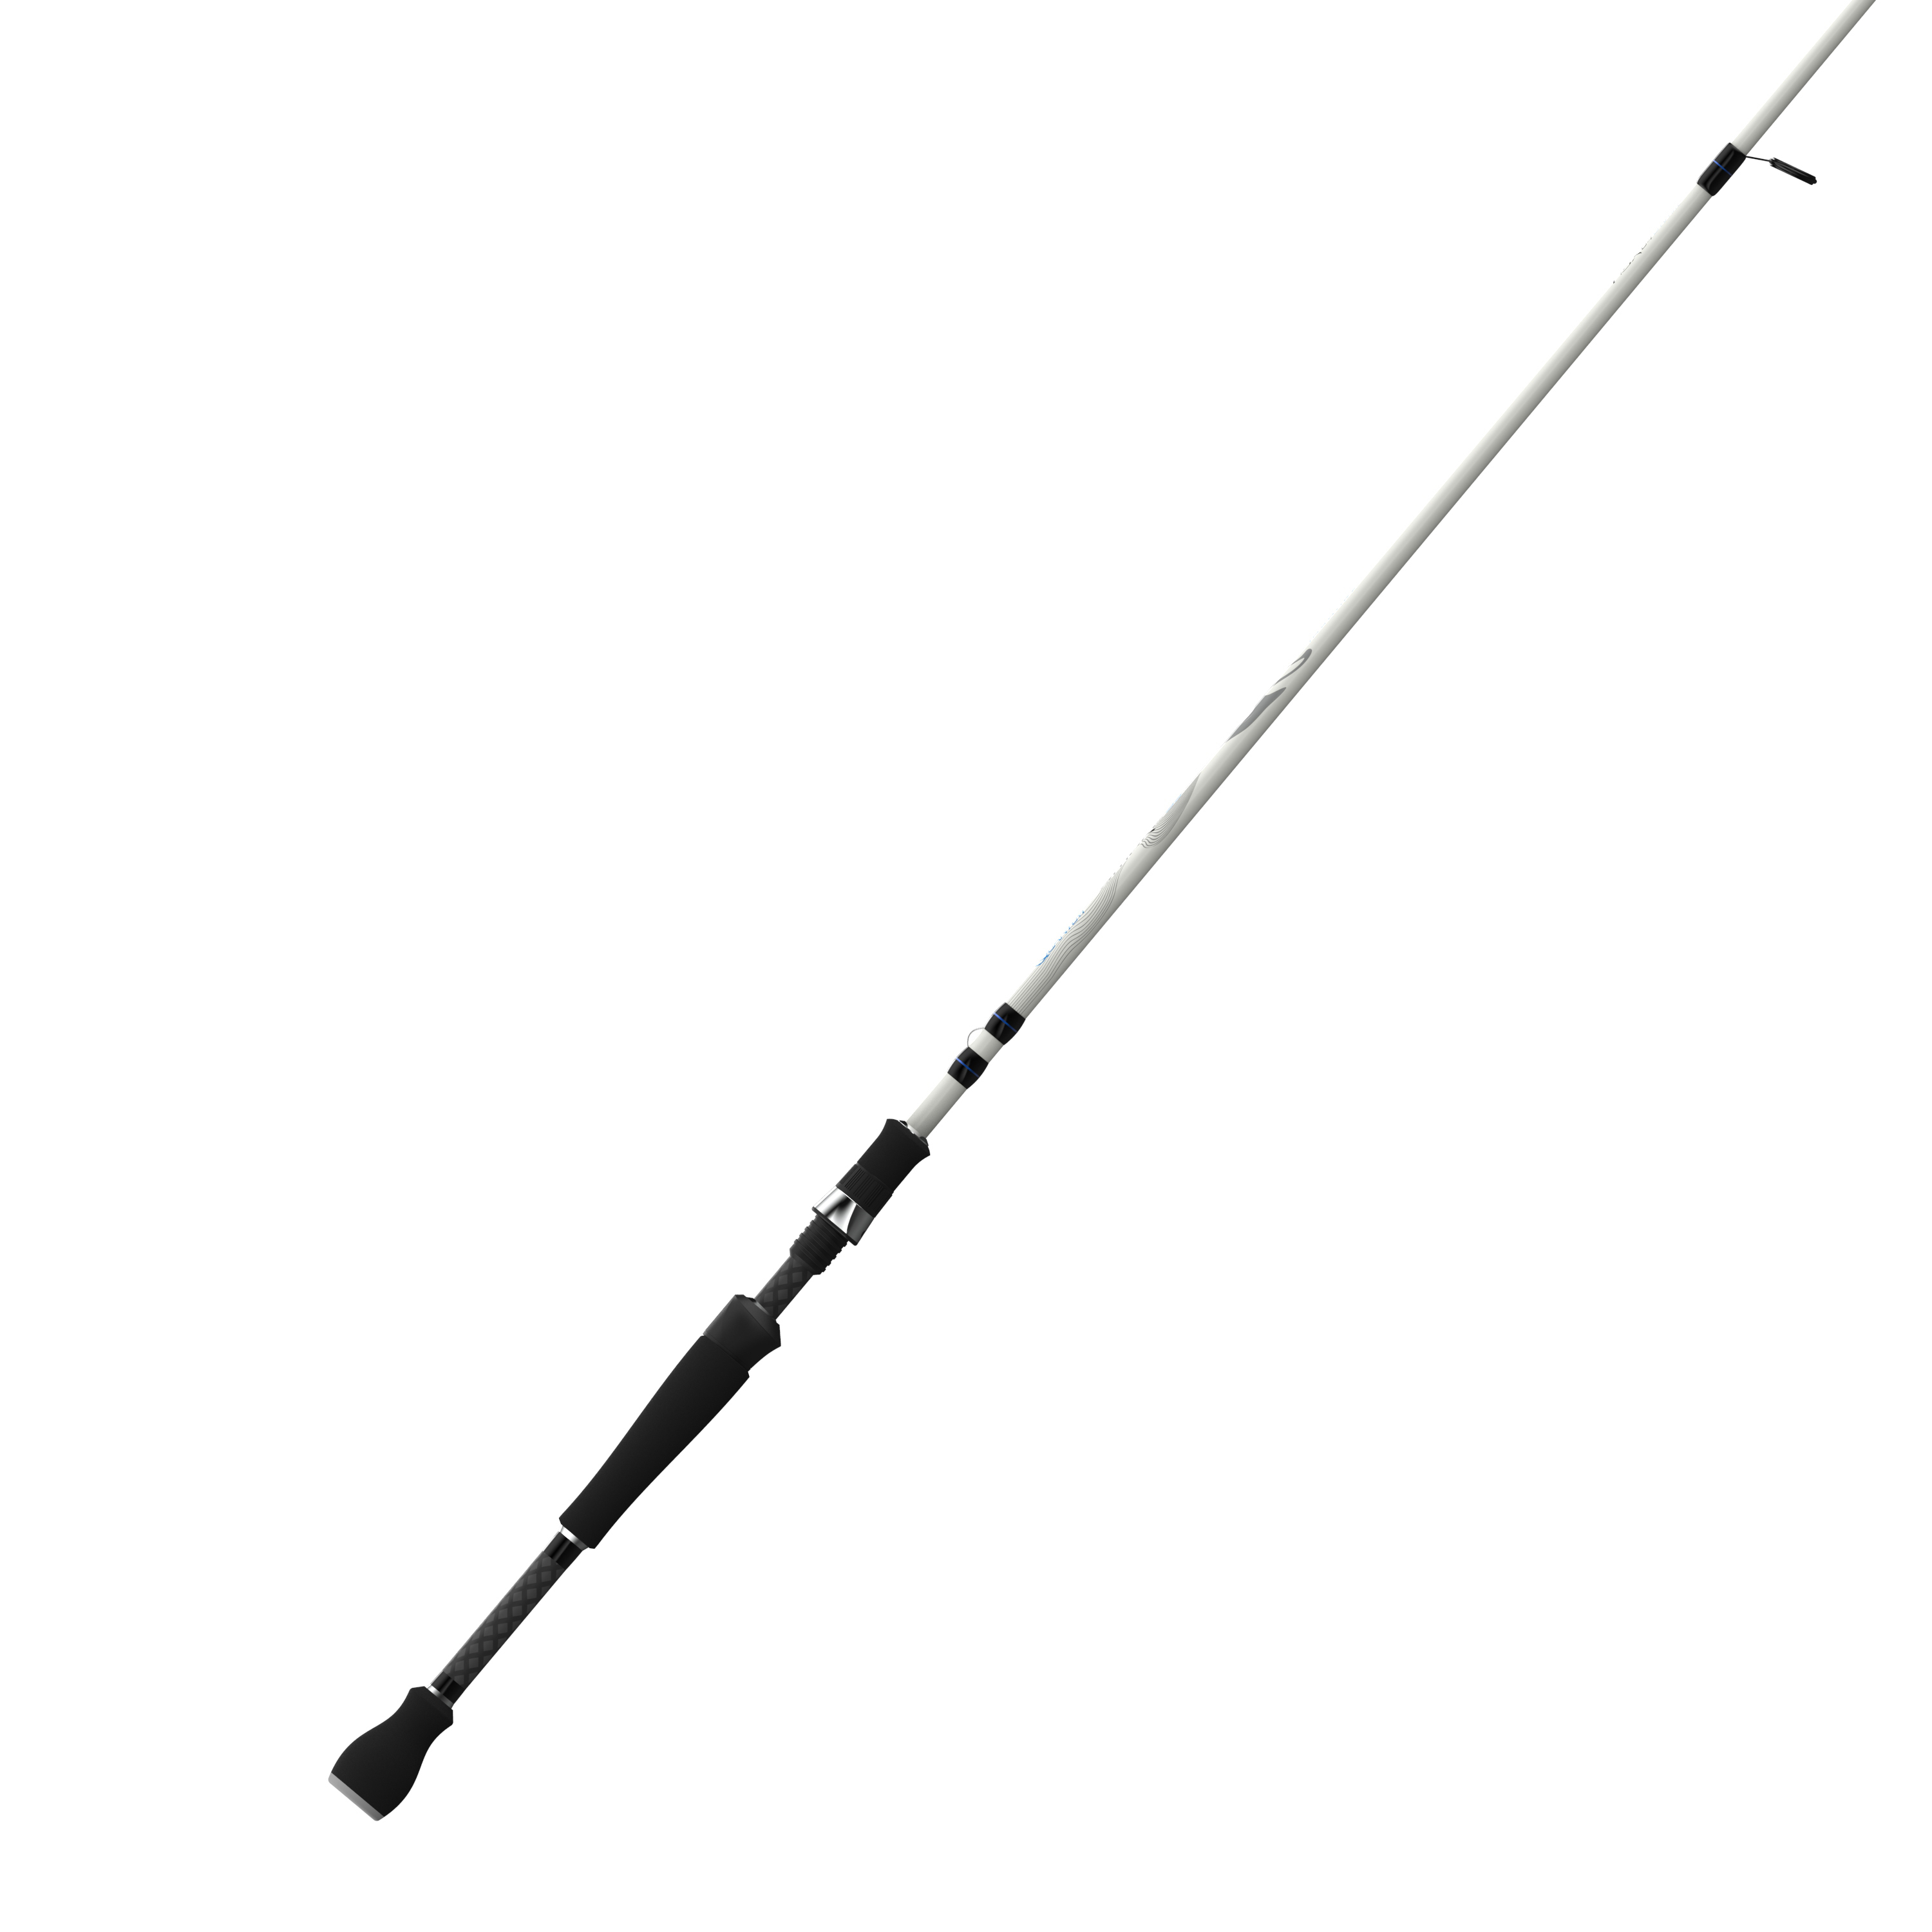 Quantum Smoke Inshore Spinning Rod , Up to 27% Off with Free S&H